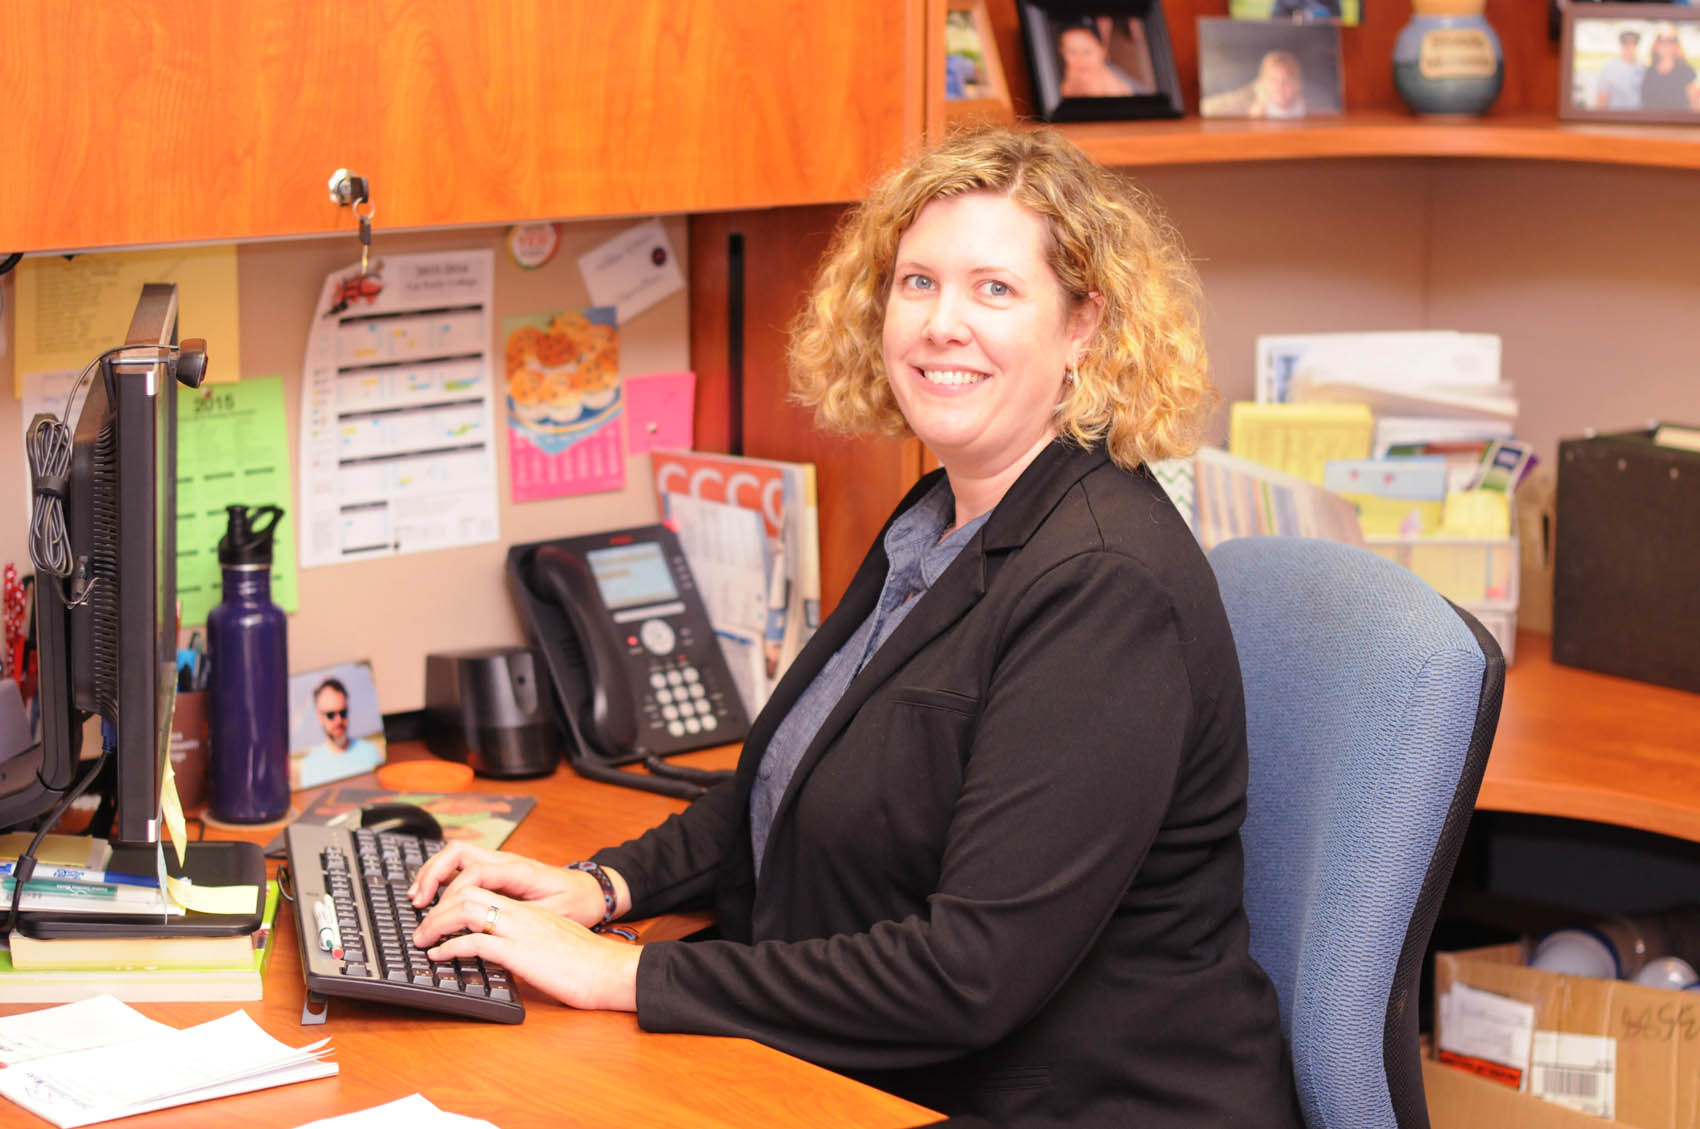 Read the full story, Virginia Mallory named CCCC's Staff Member of the Year